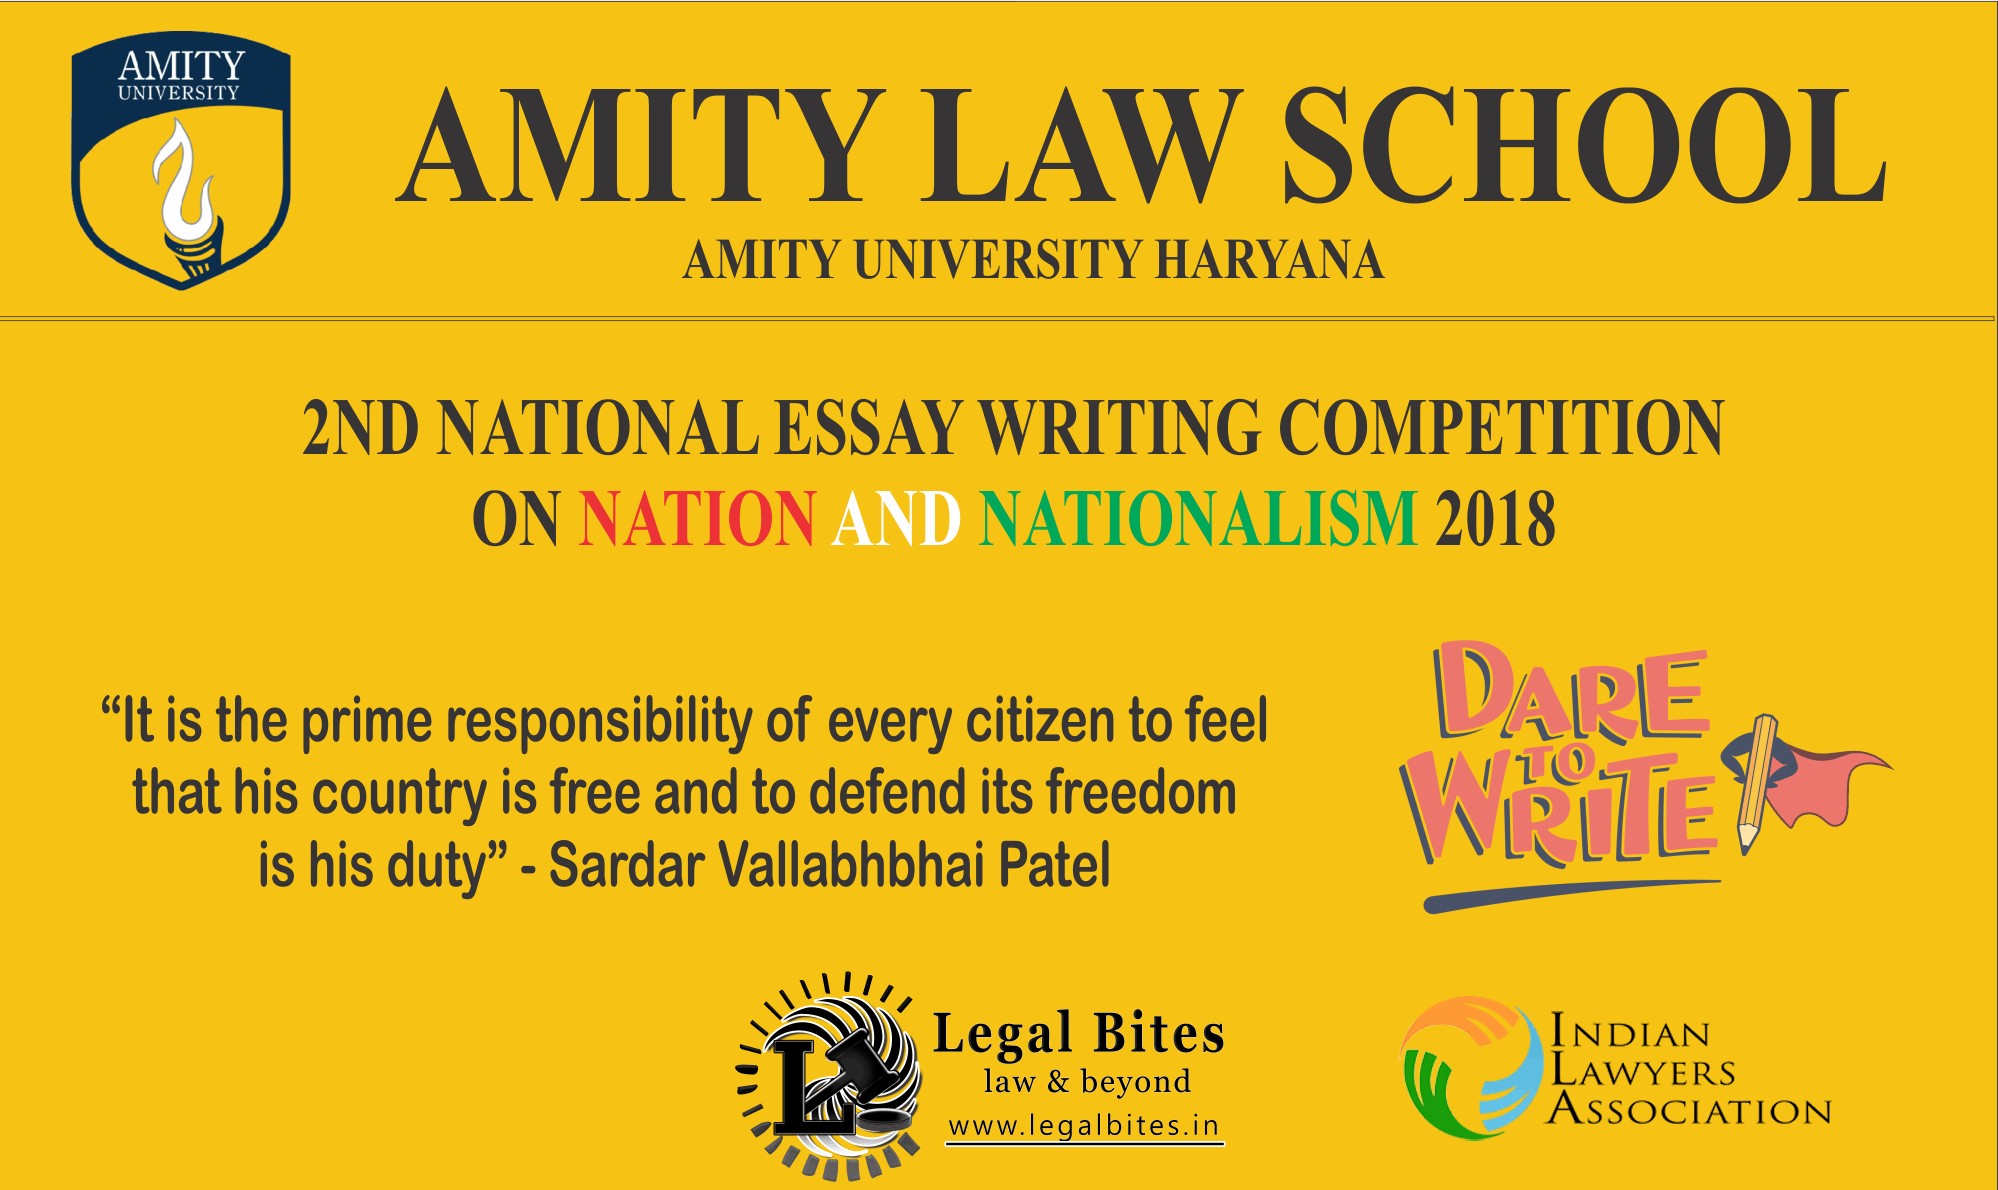 Result - 2nd National Essay Writing Competition on Nation and Nationalism 2018